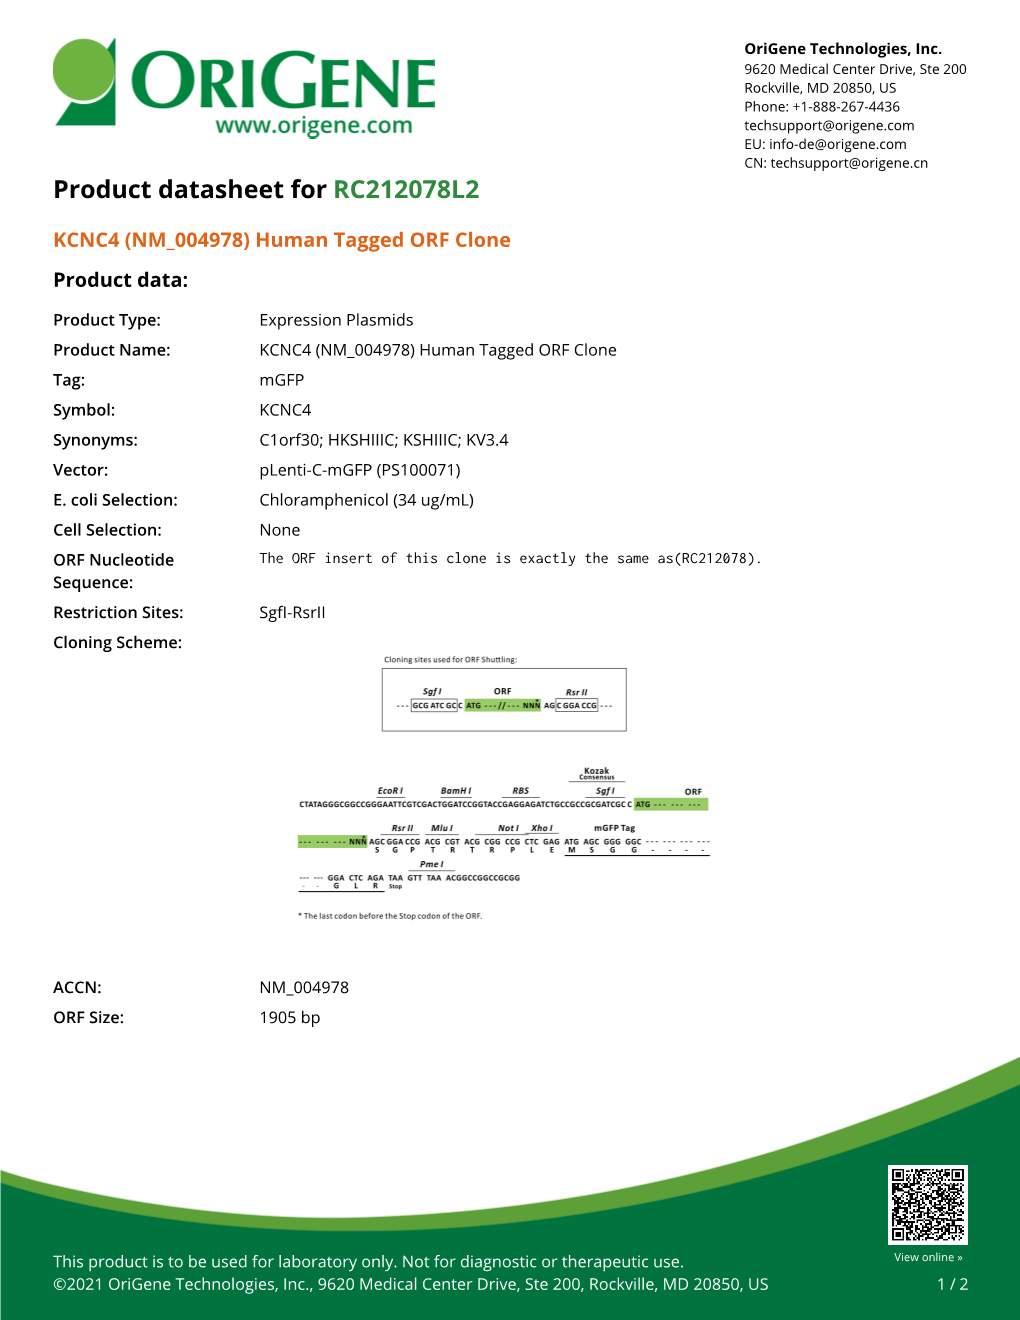 KCNC4 (NM 004978) Human Tagged ORF Clone Product Data